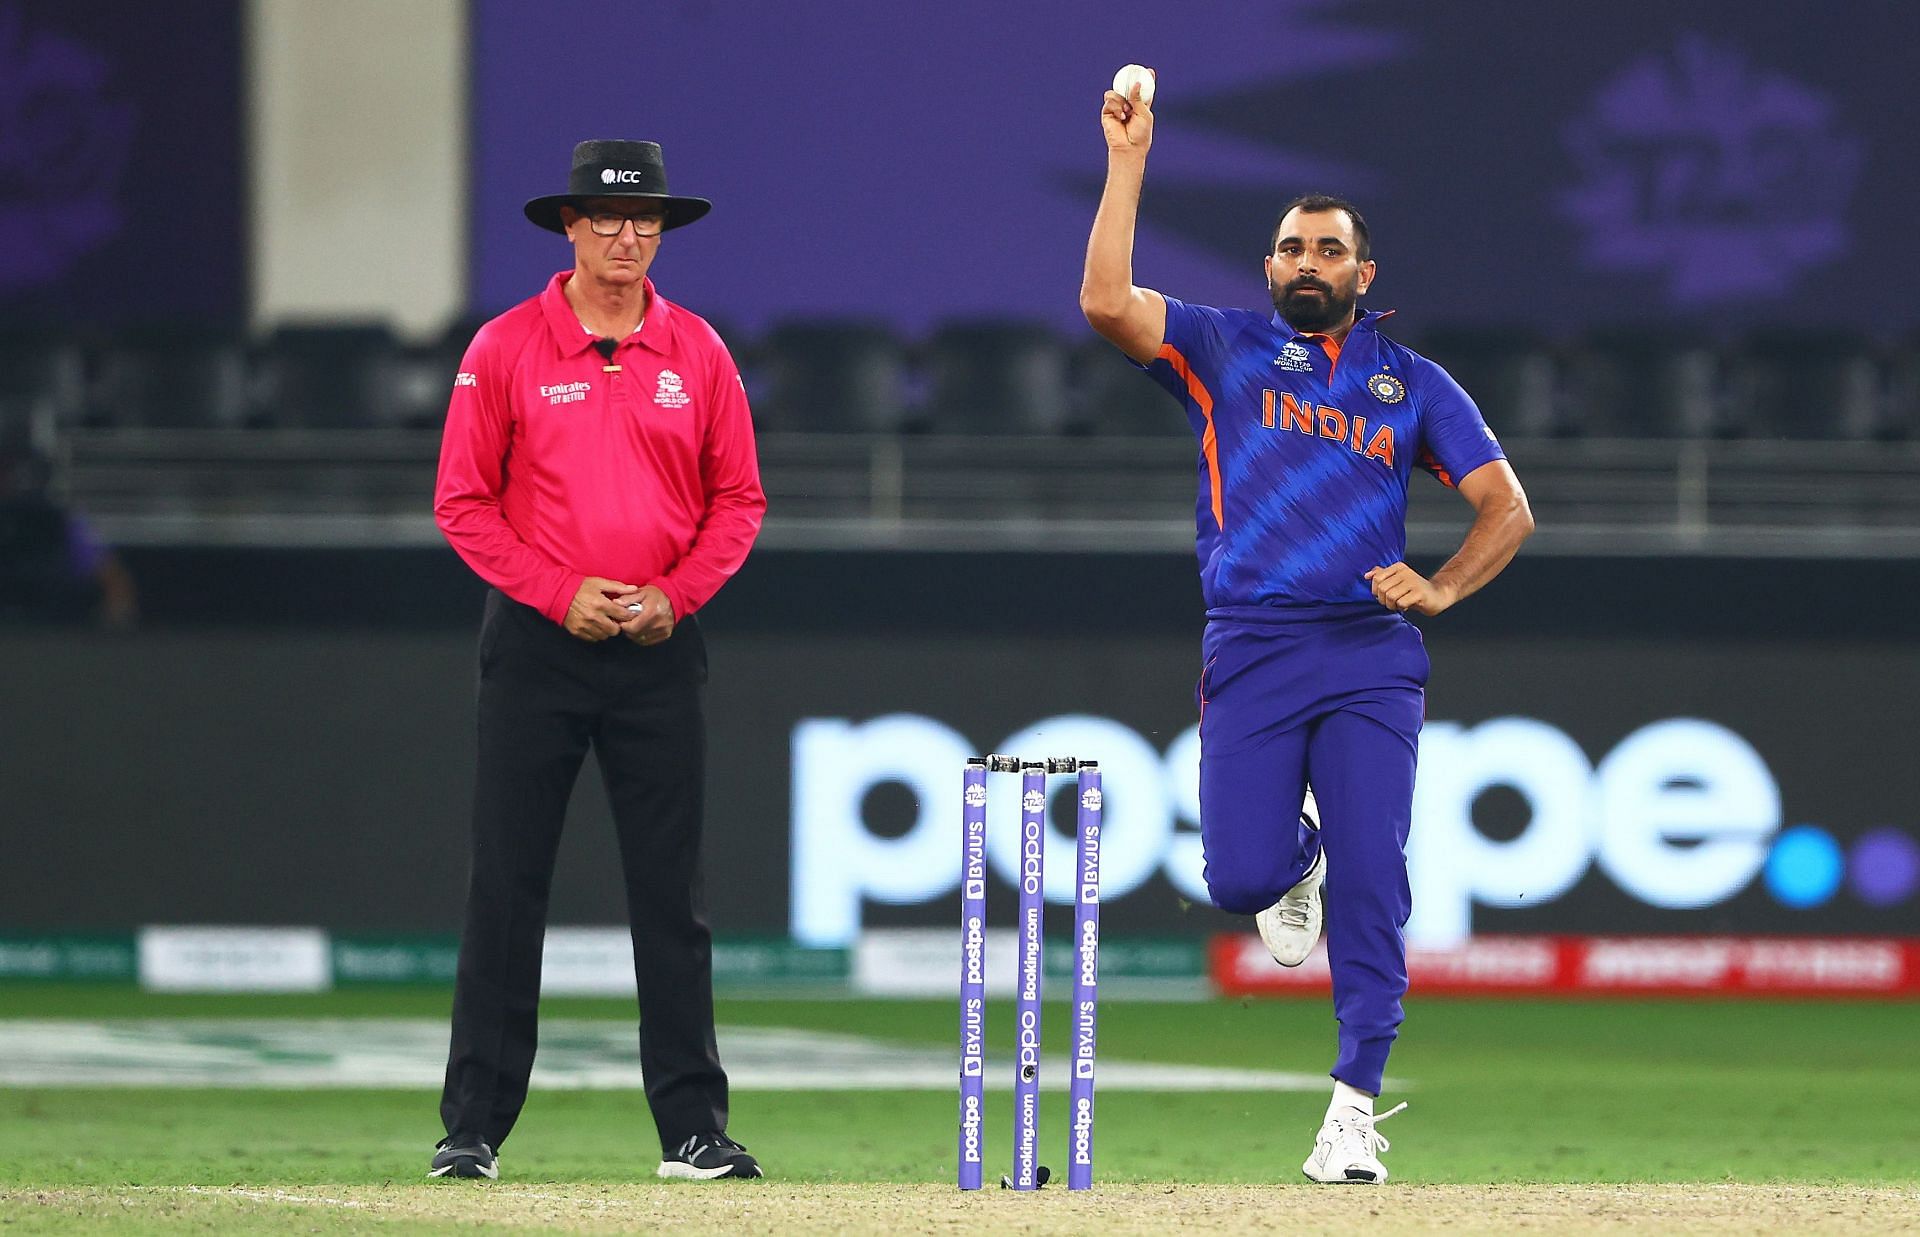 Mohammad Shami has not played a T20I since the World Cup last year